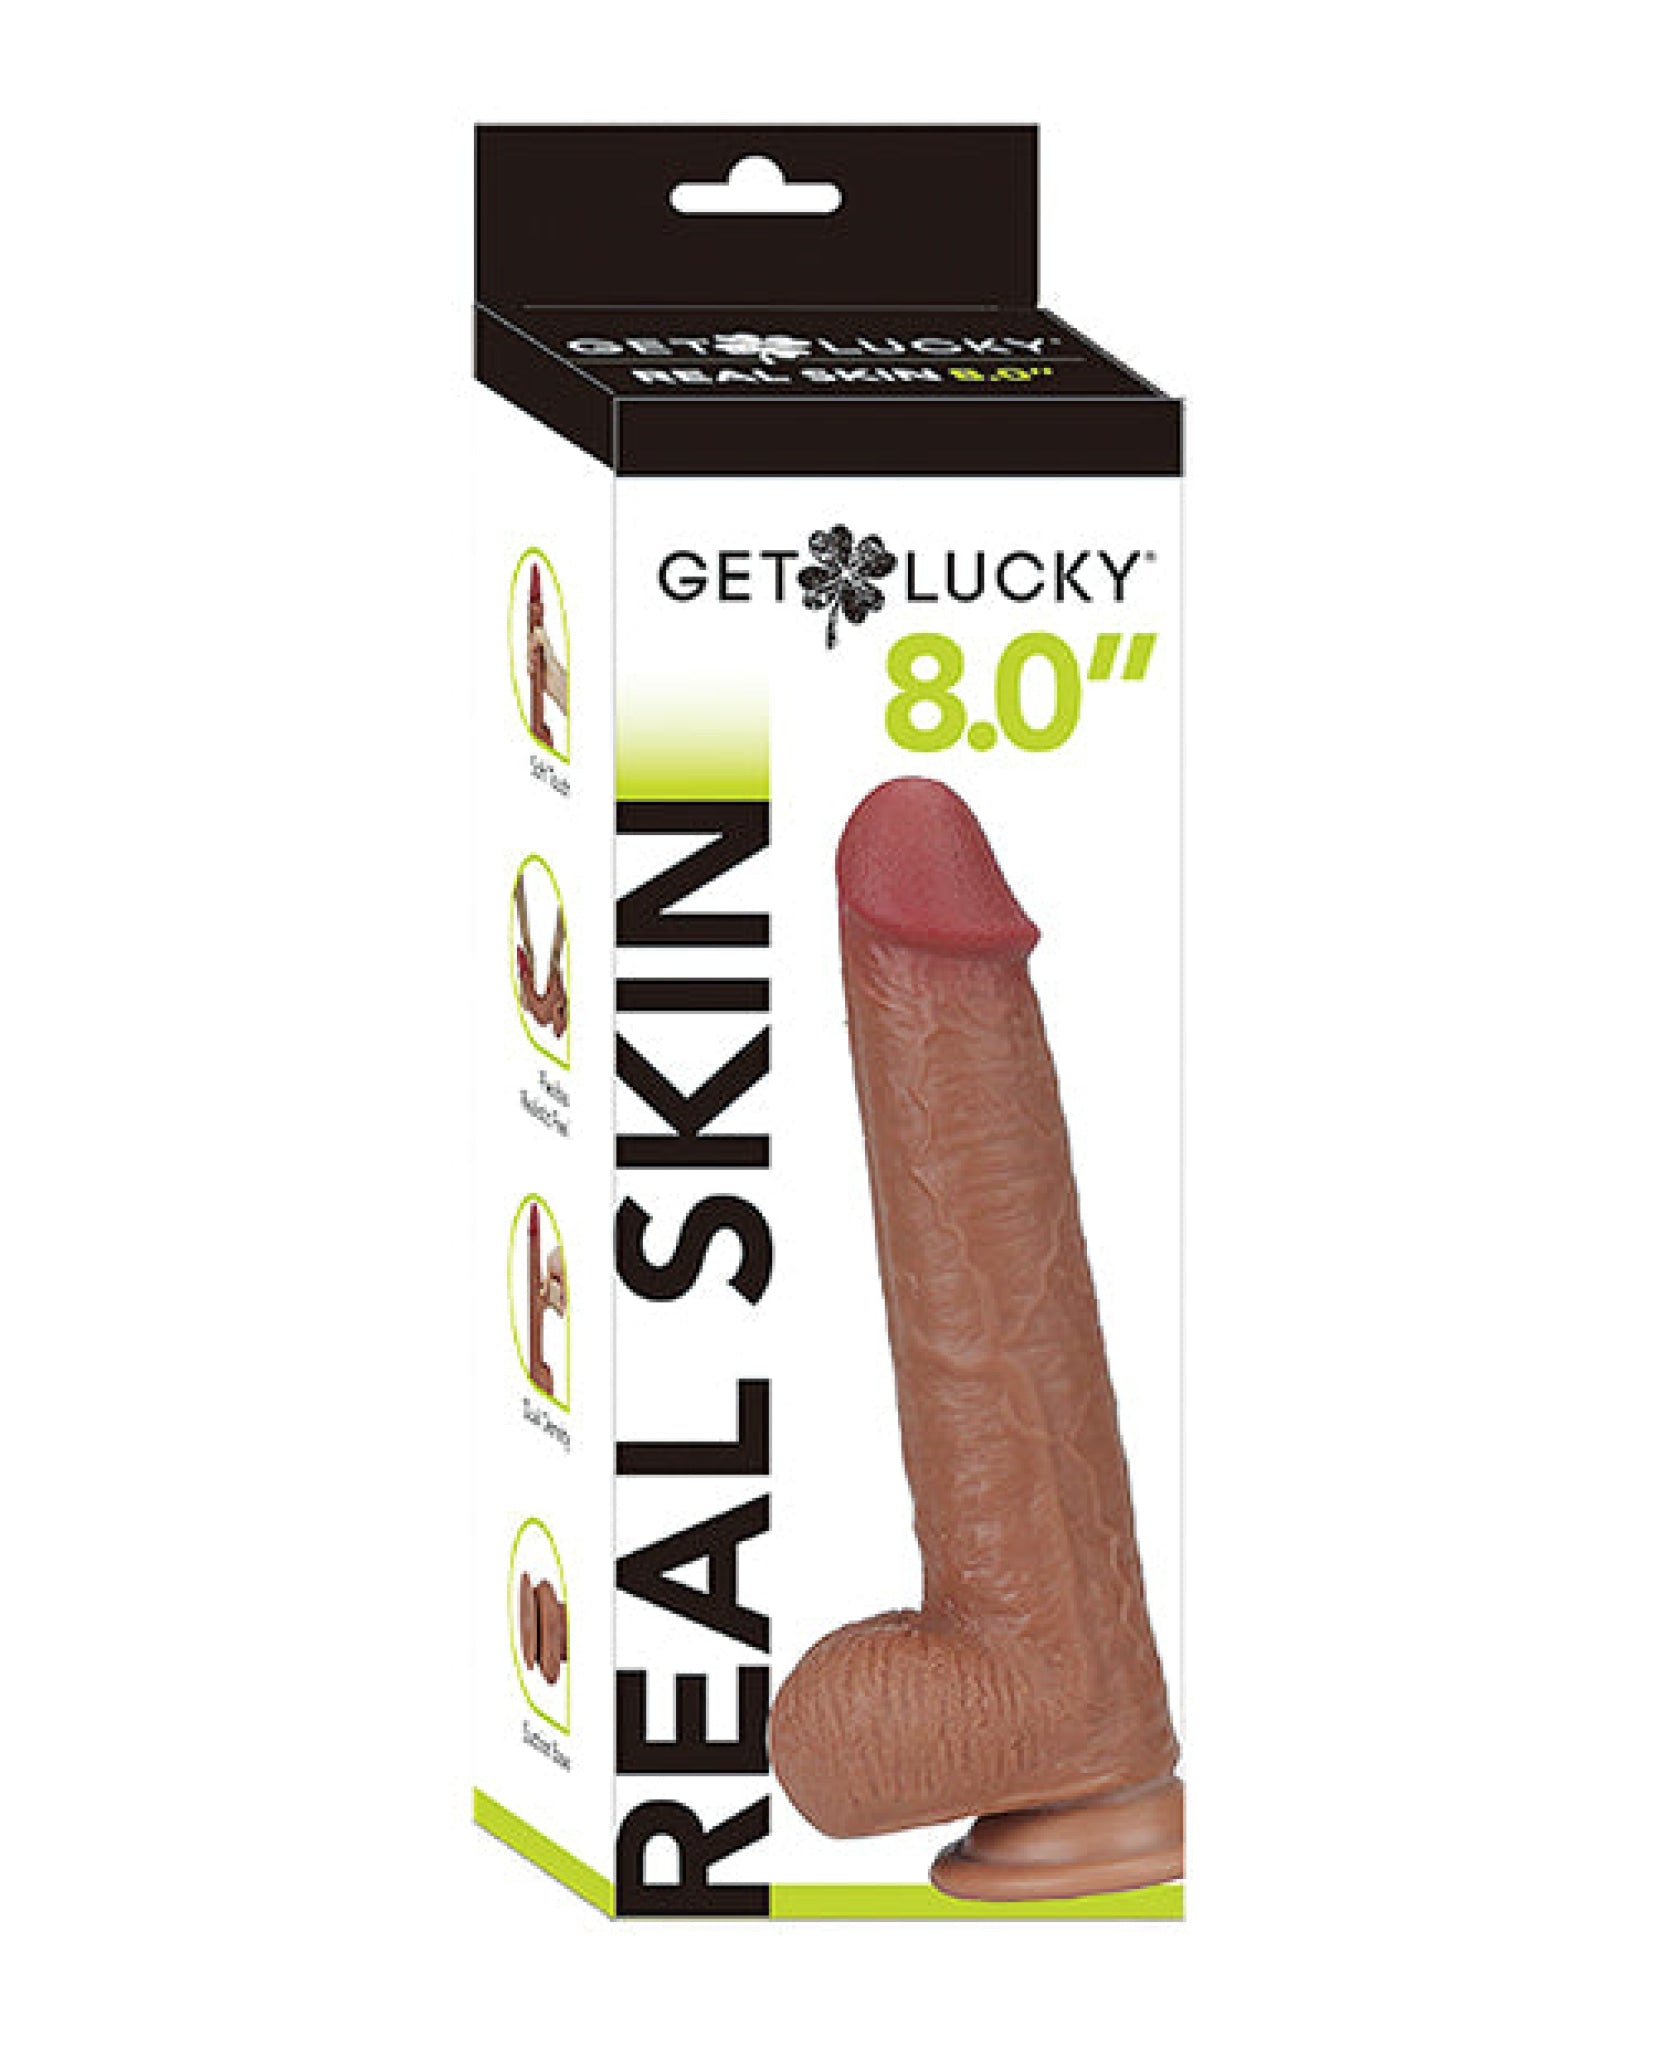 Get Lucky 8.0" Real Skin Series Get Lucky